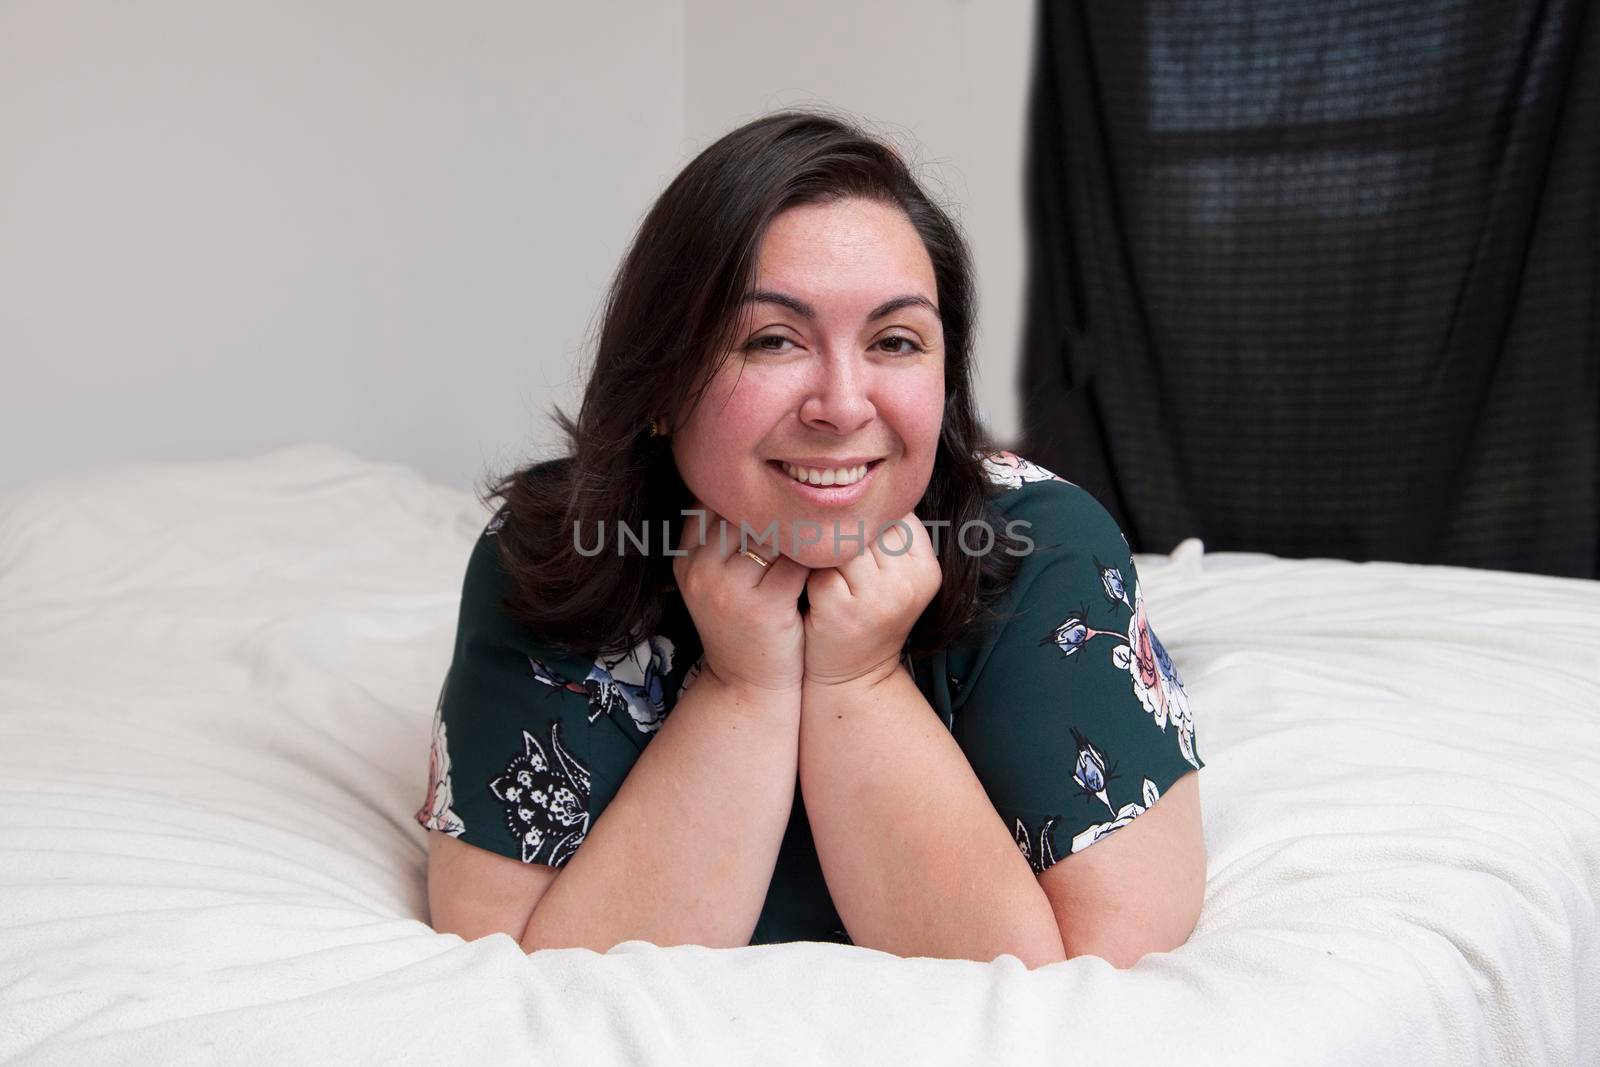 A relaxed happy woman lays on her bed at home looking at the camera in a portrait